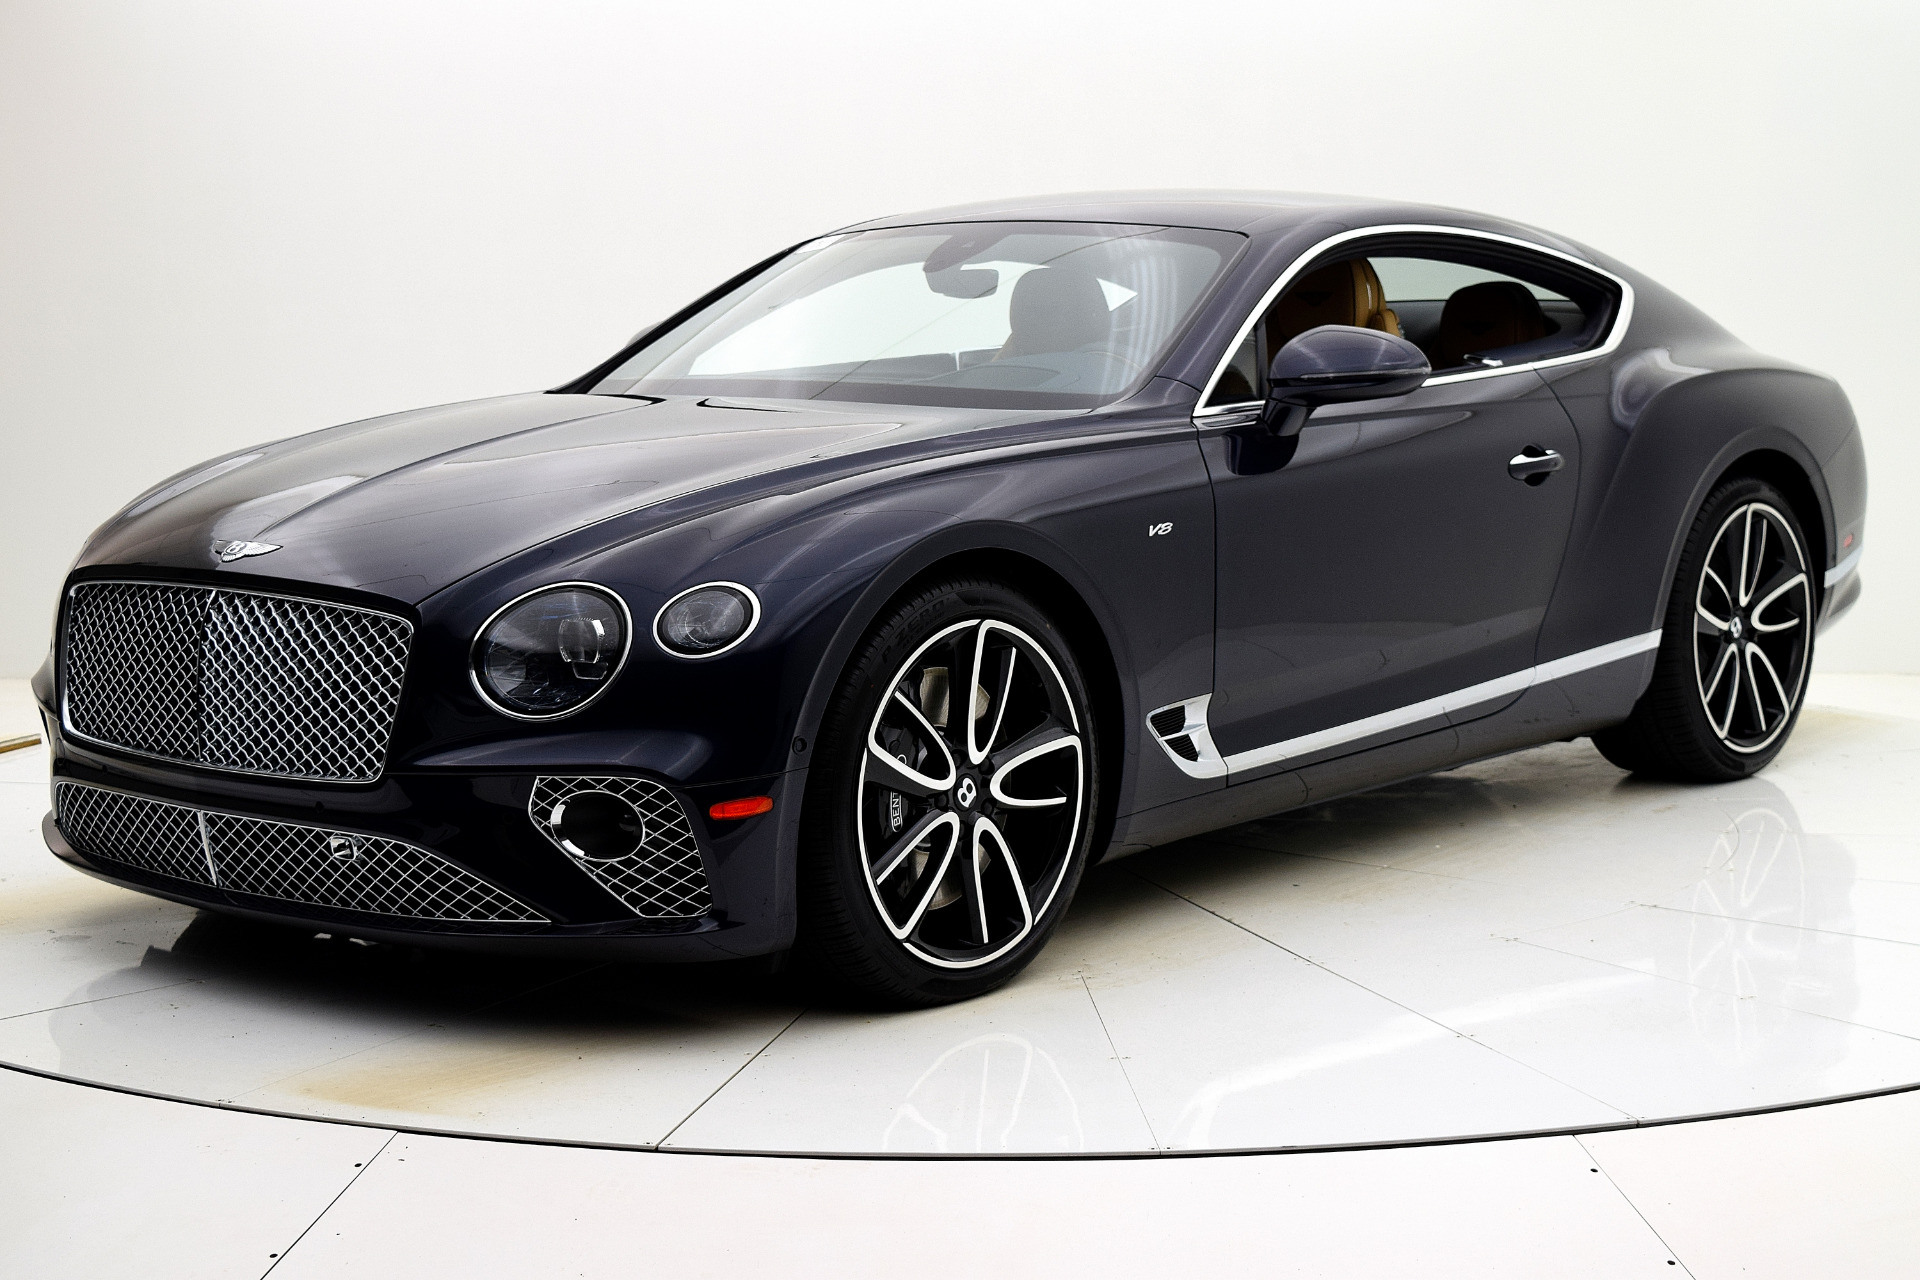 New 2021 Bentley Continental GT V8 Coupe for sale Sold at Bentley Palmyra N.J. in Palmyra NJ 08065 2